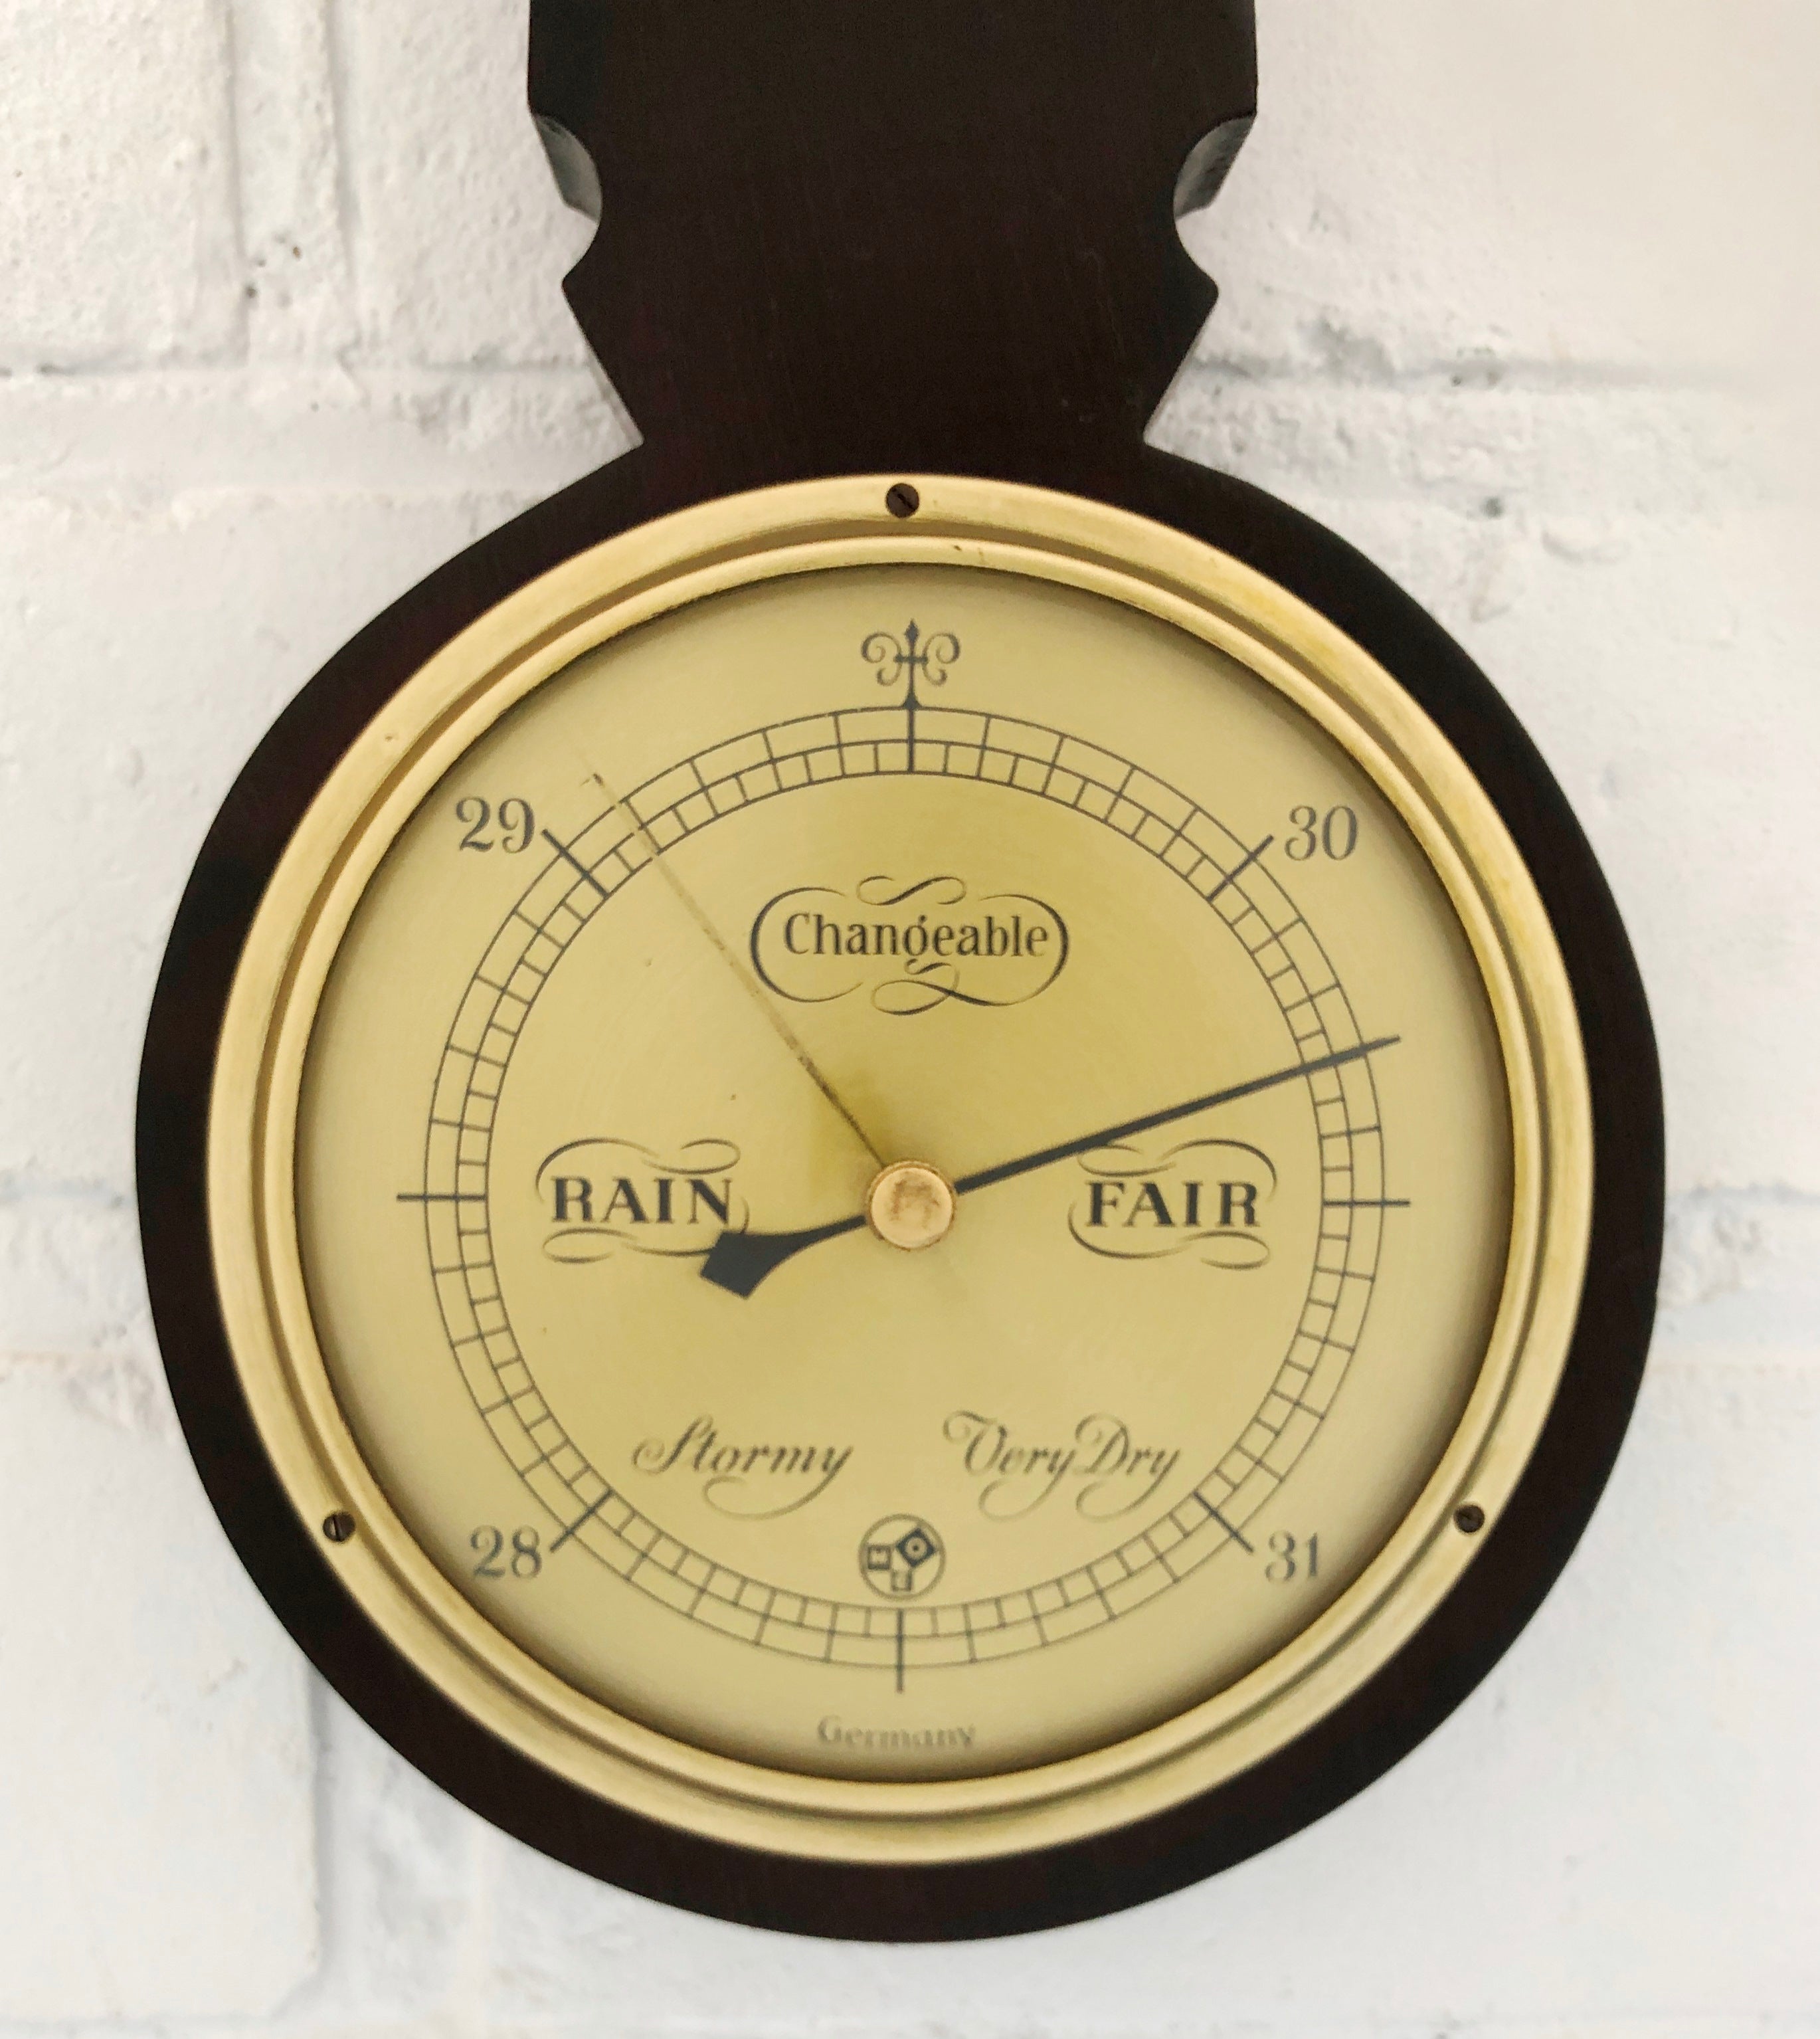 Vintage Wall Barometer & Thermometer | eXibit collection